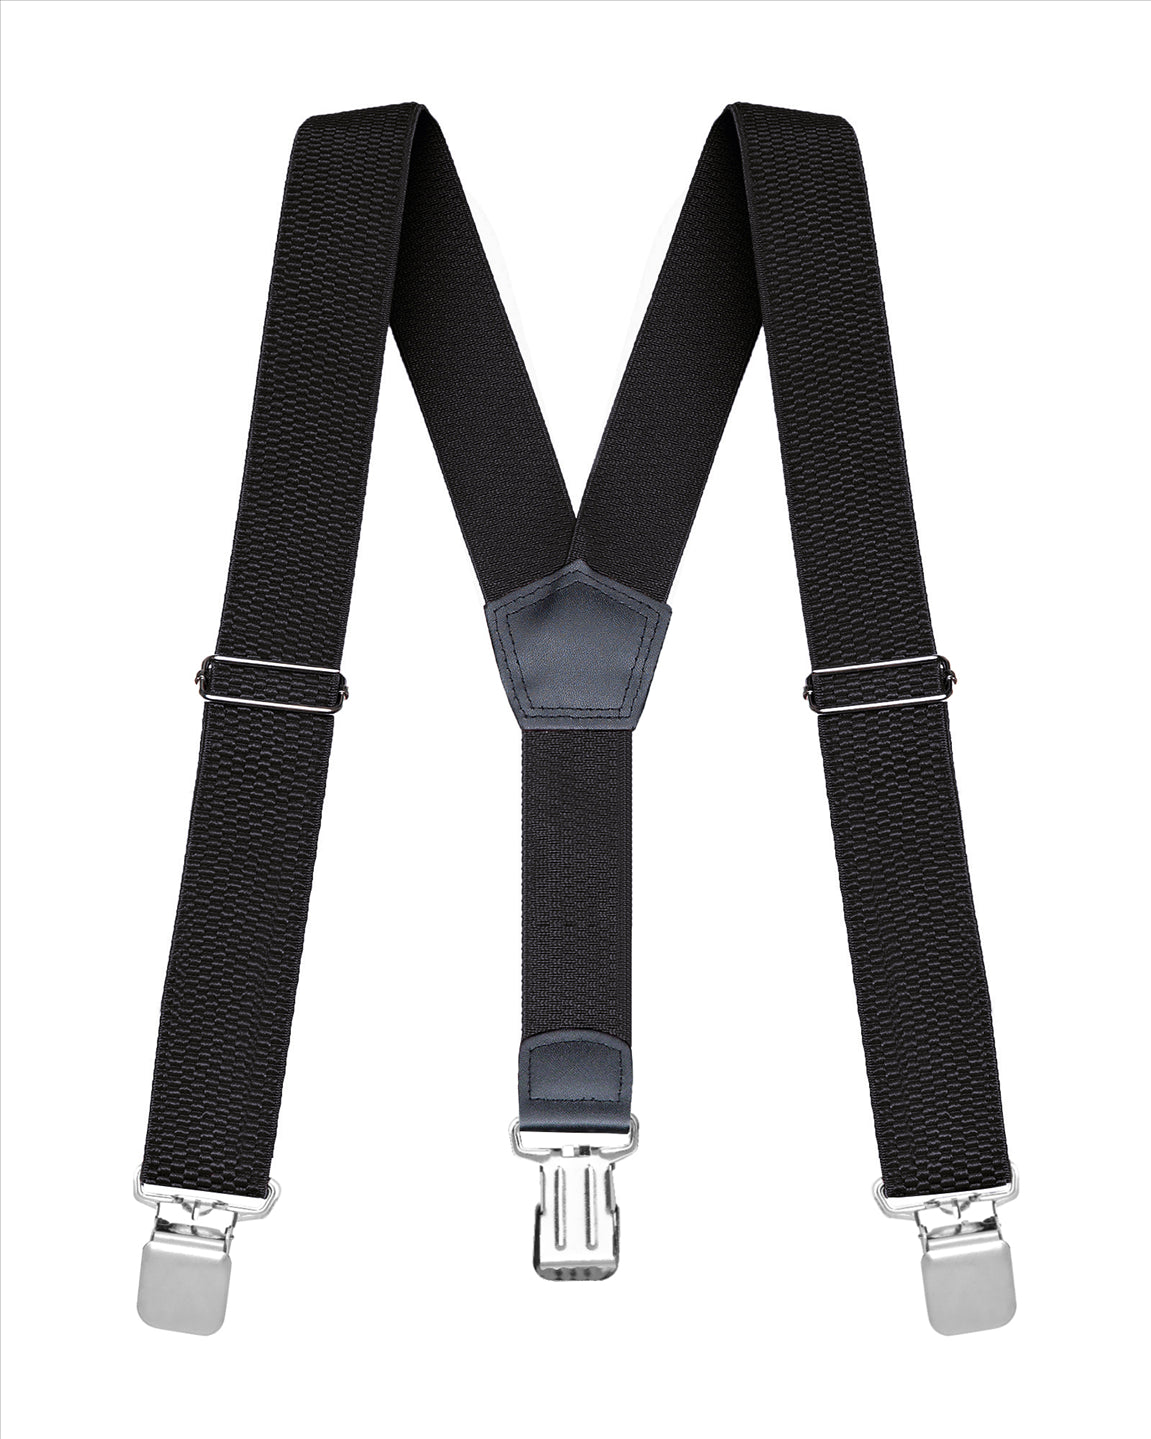 Buyless Fashion Heavy Duty Textured Suspenders for Men - 48